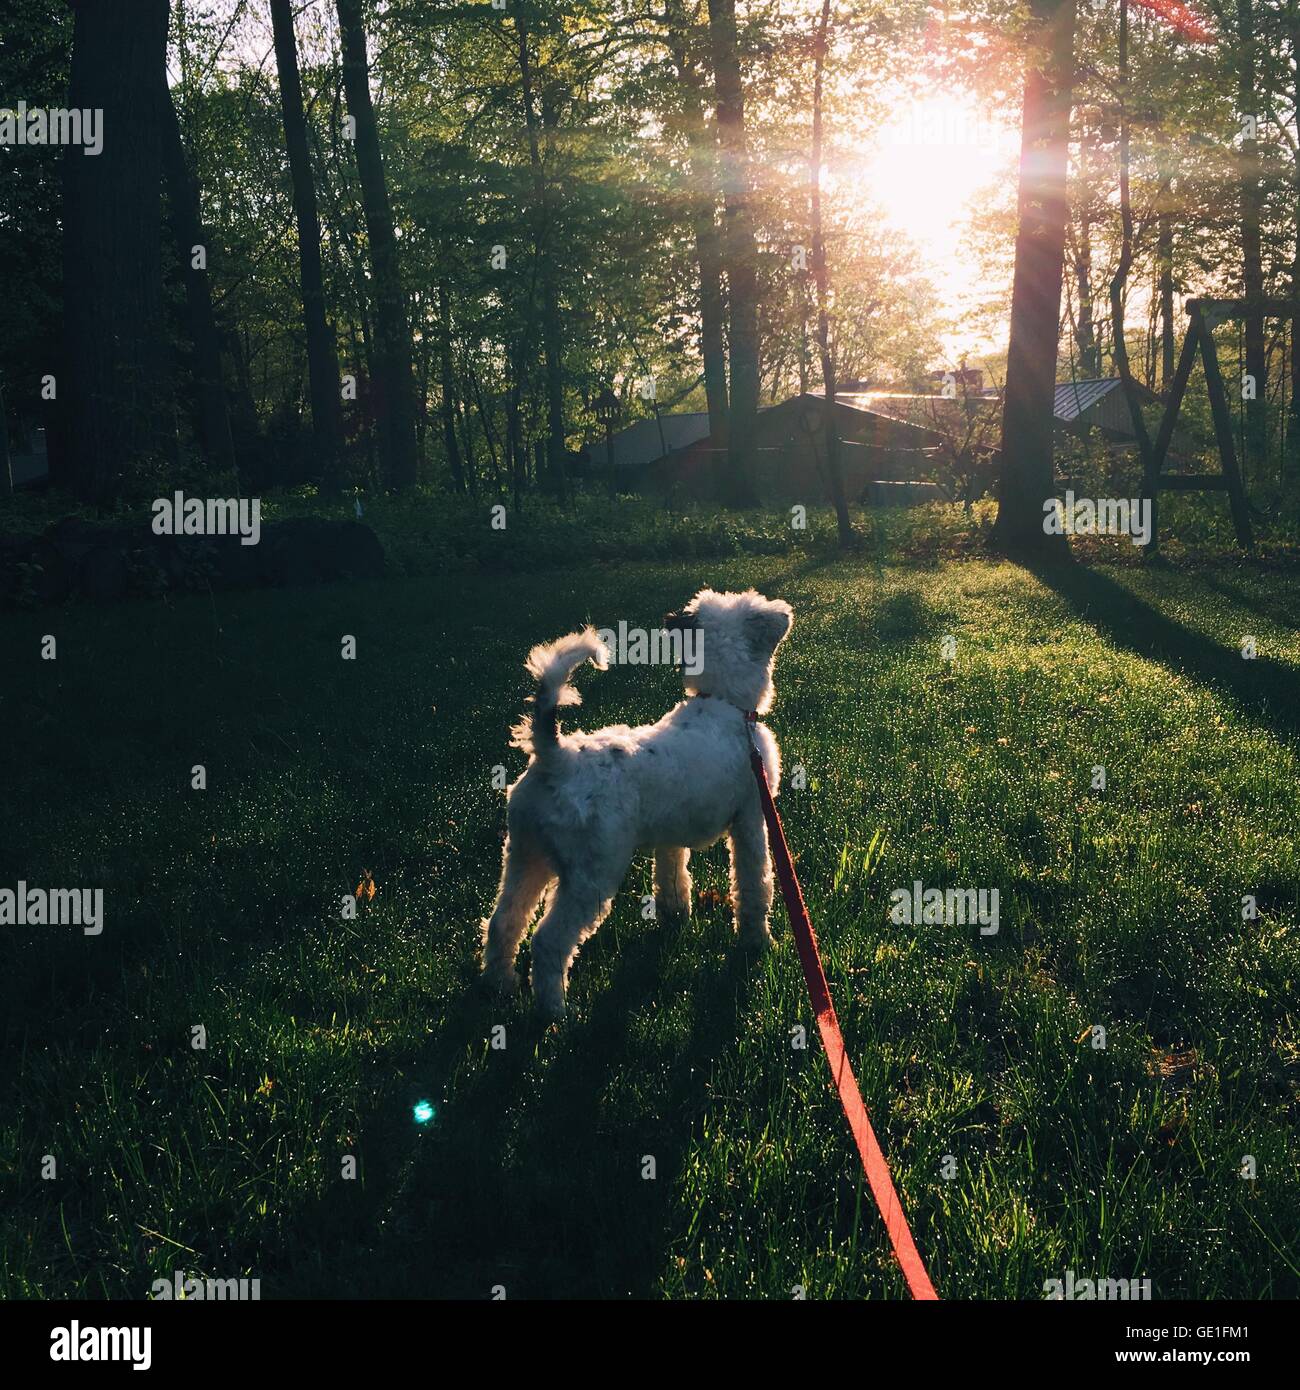 Dog on leash in forest Stock Photo